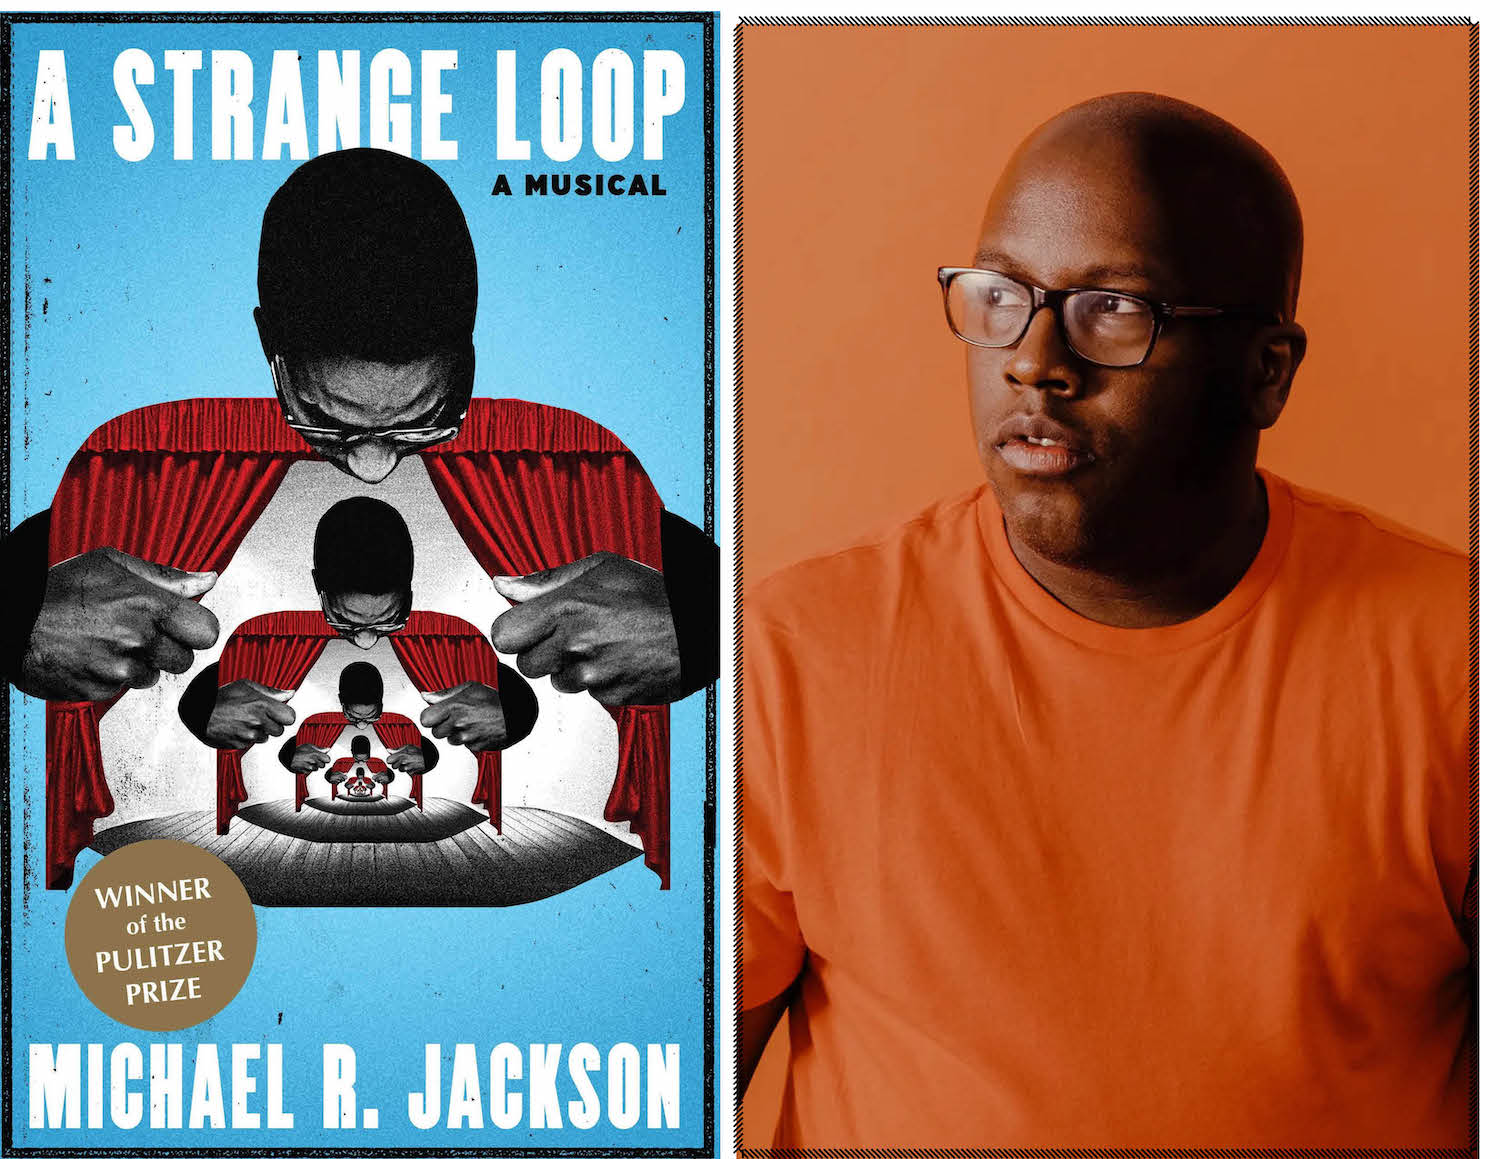 Blue poster with white letters for "A Strange Loop, a musical" by Michael R. Jackson next to a photo of a black man with glasses in orange t-shirt on an orange background looking to the side